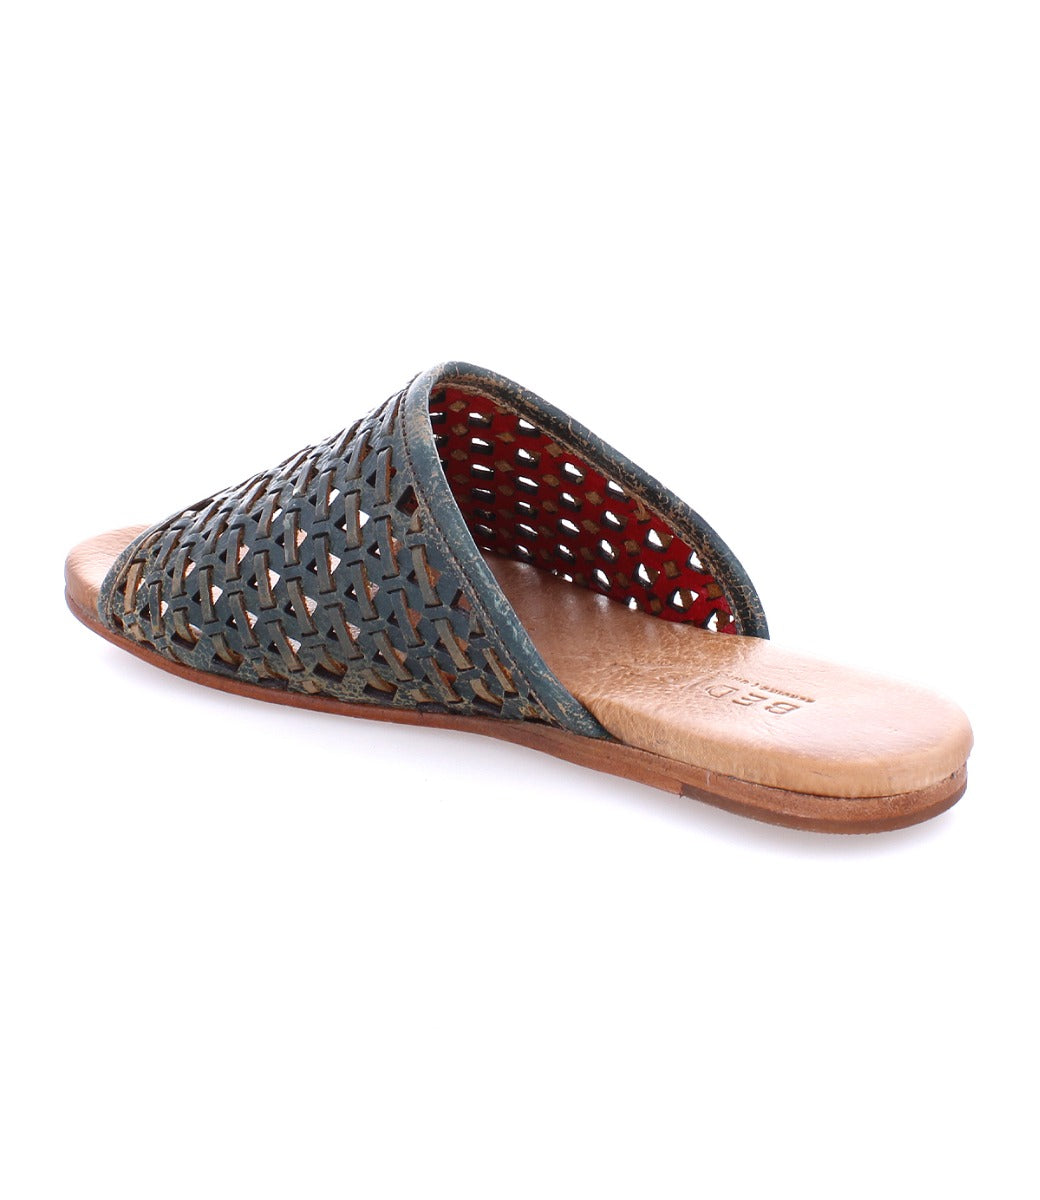 A women's woven slipper with a leather sole, the Minerva slipper by Bed Stu.